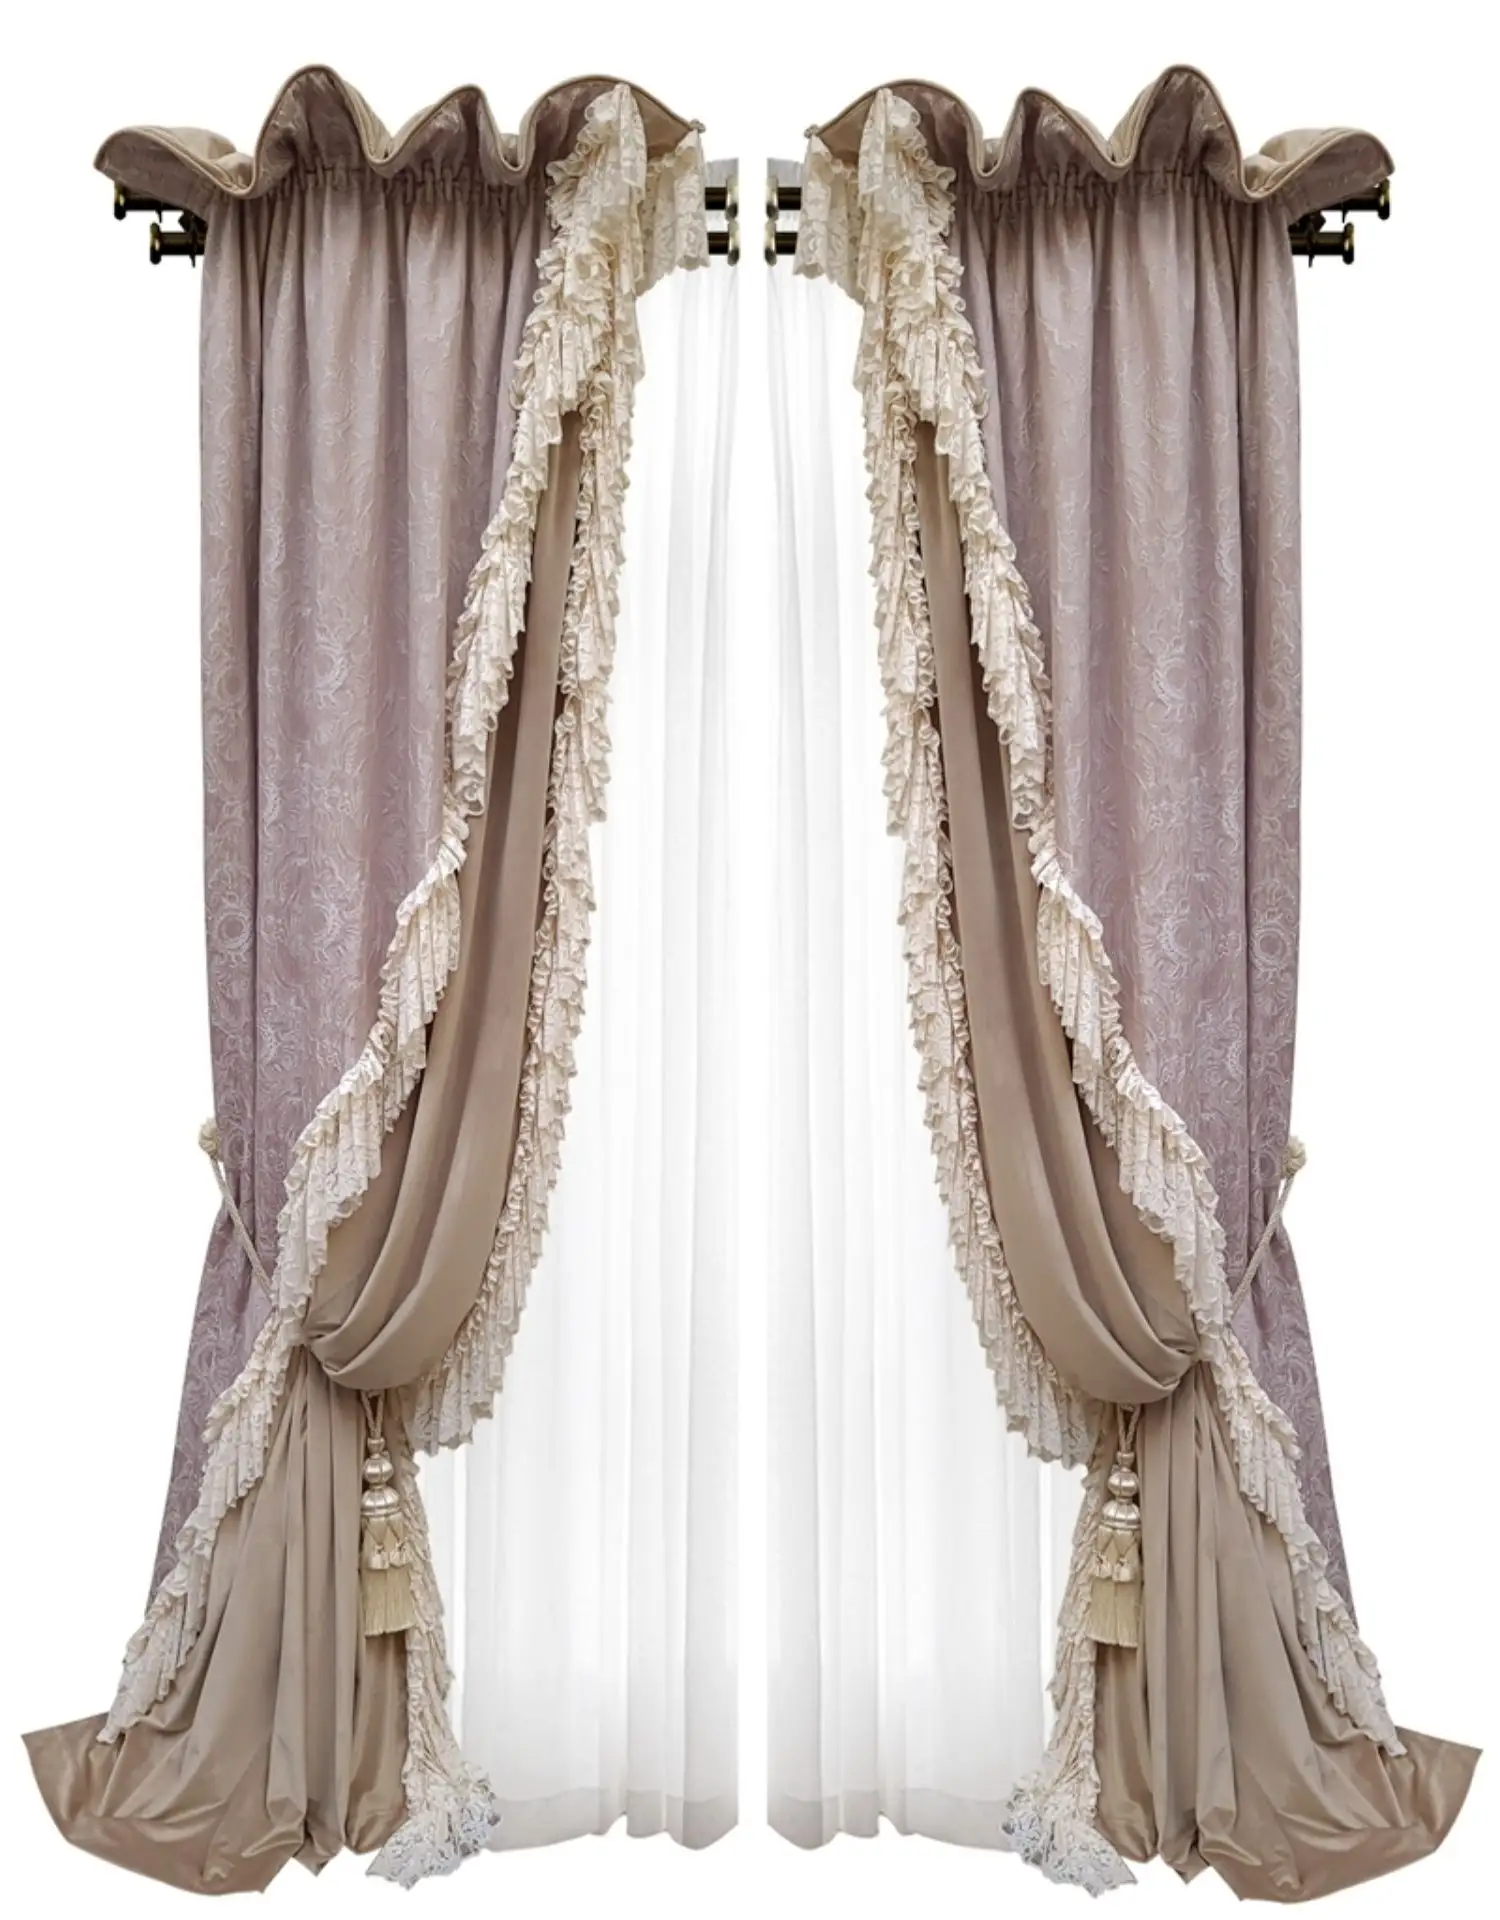 Top Luxury French curtain Customized Jacquard Romantic Trim Court Rococo Lace Velvet Curtains for living room bedroom